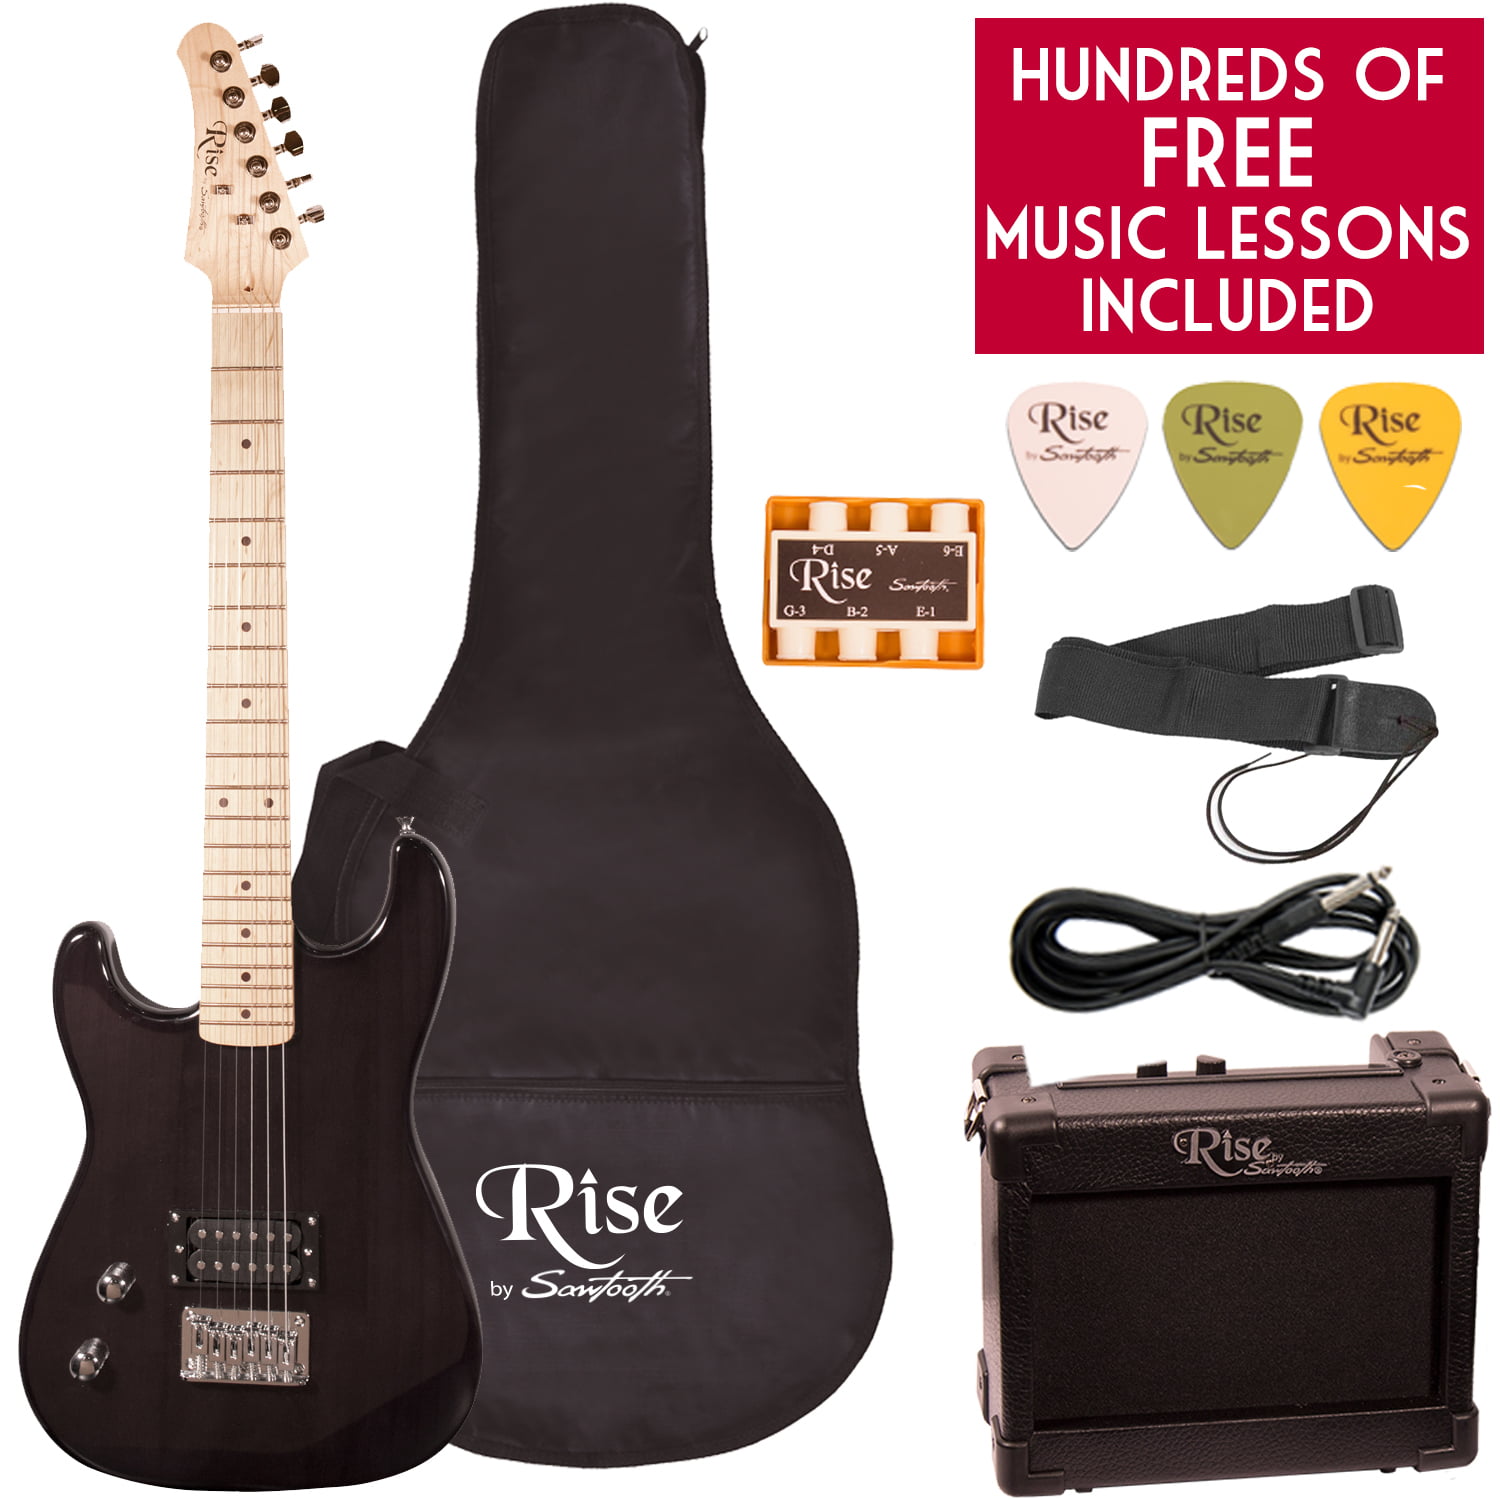 Rise by Sawtooth Left Hand Full Size Beginner's Electric Guitar